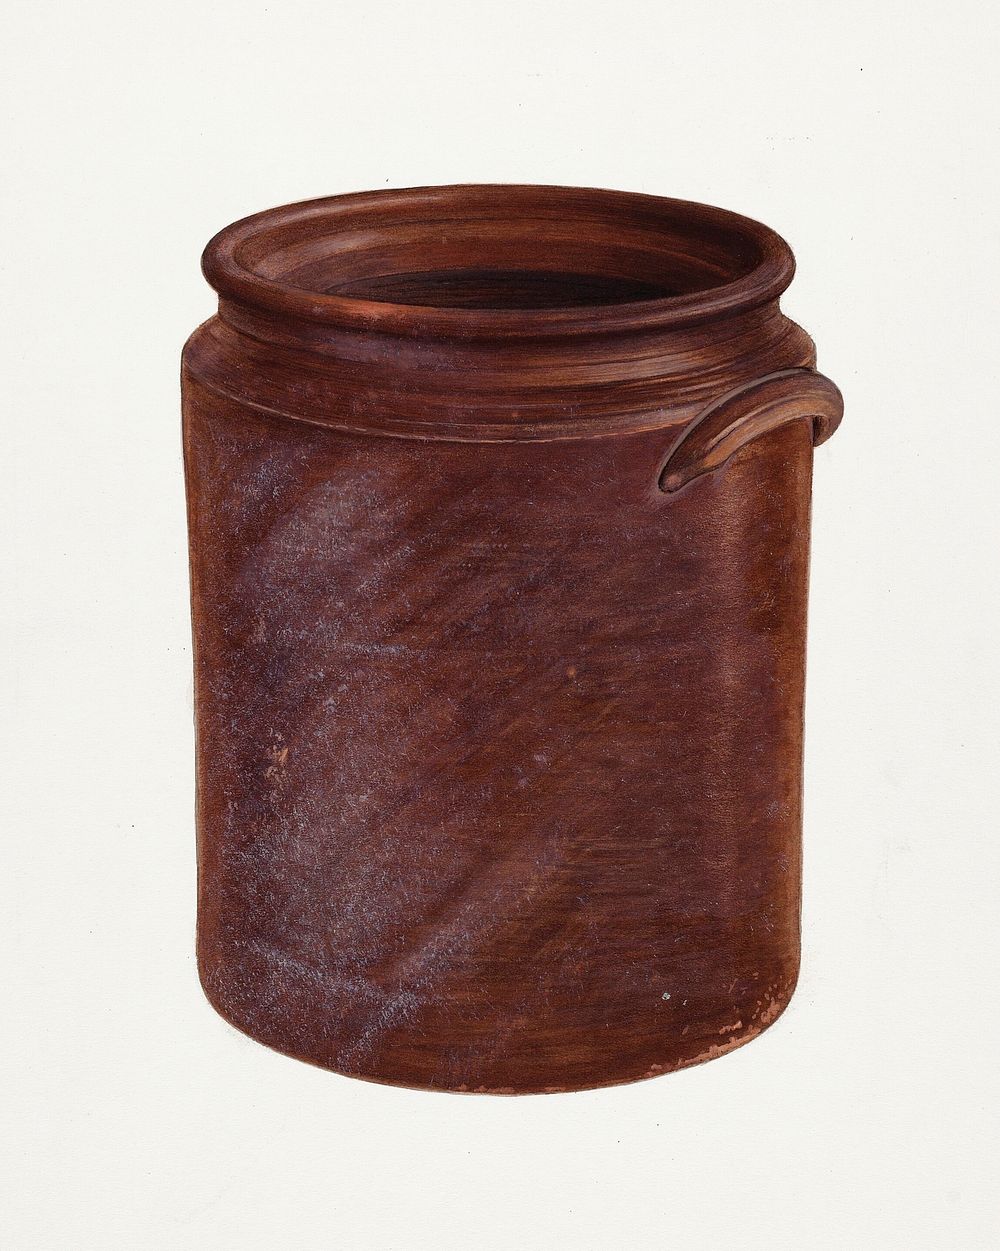 Eardley Jar (ca.1938) by Clyde L. Cheney. Original from The National Gallery of Art. Digitally enhanced by rawpixel.